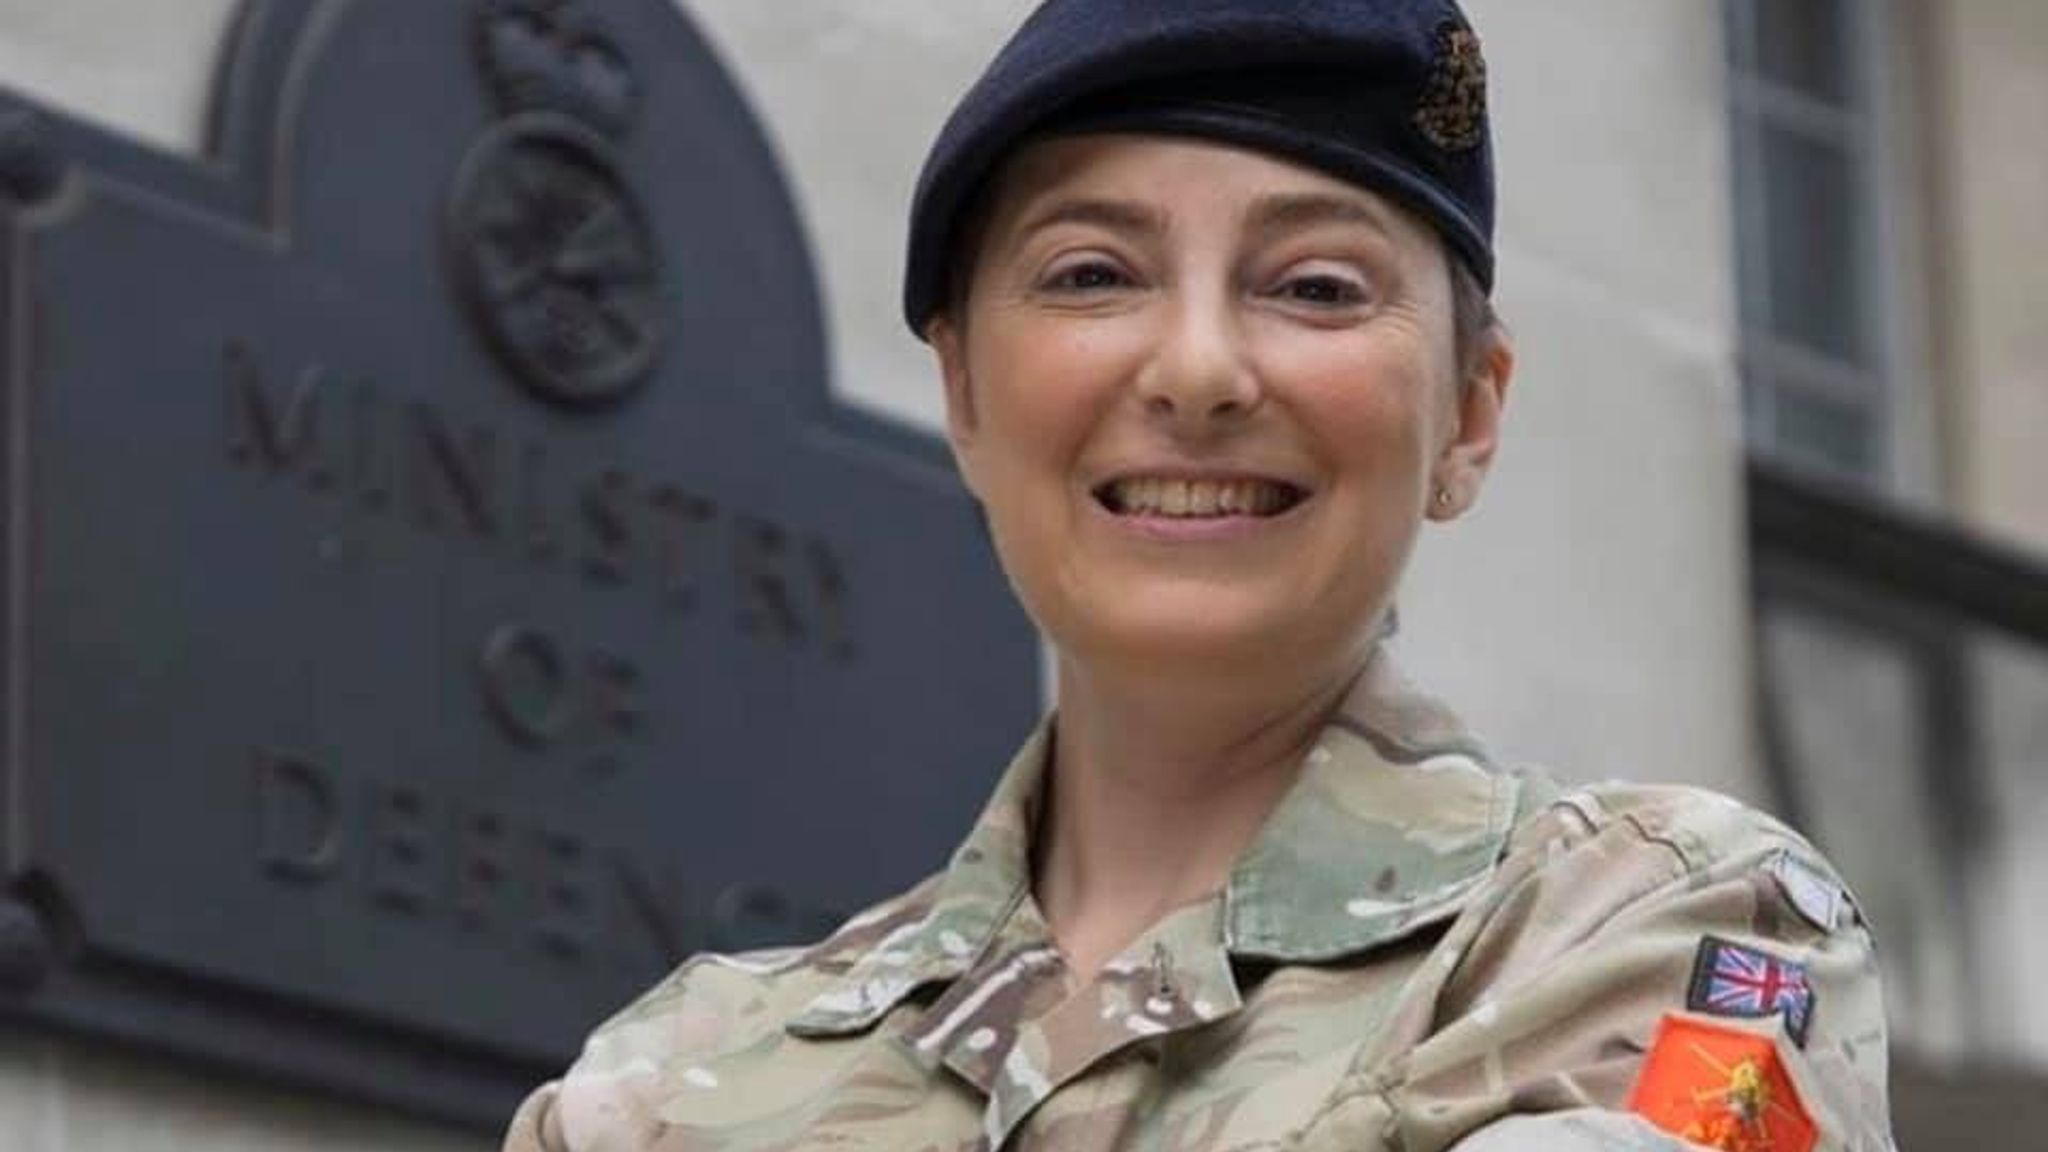 Major Mandy Islam Funeral At Sandhurst For Inspirational Woman Who